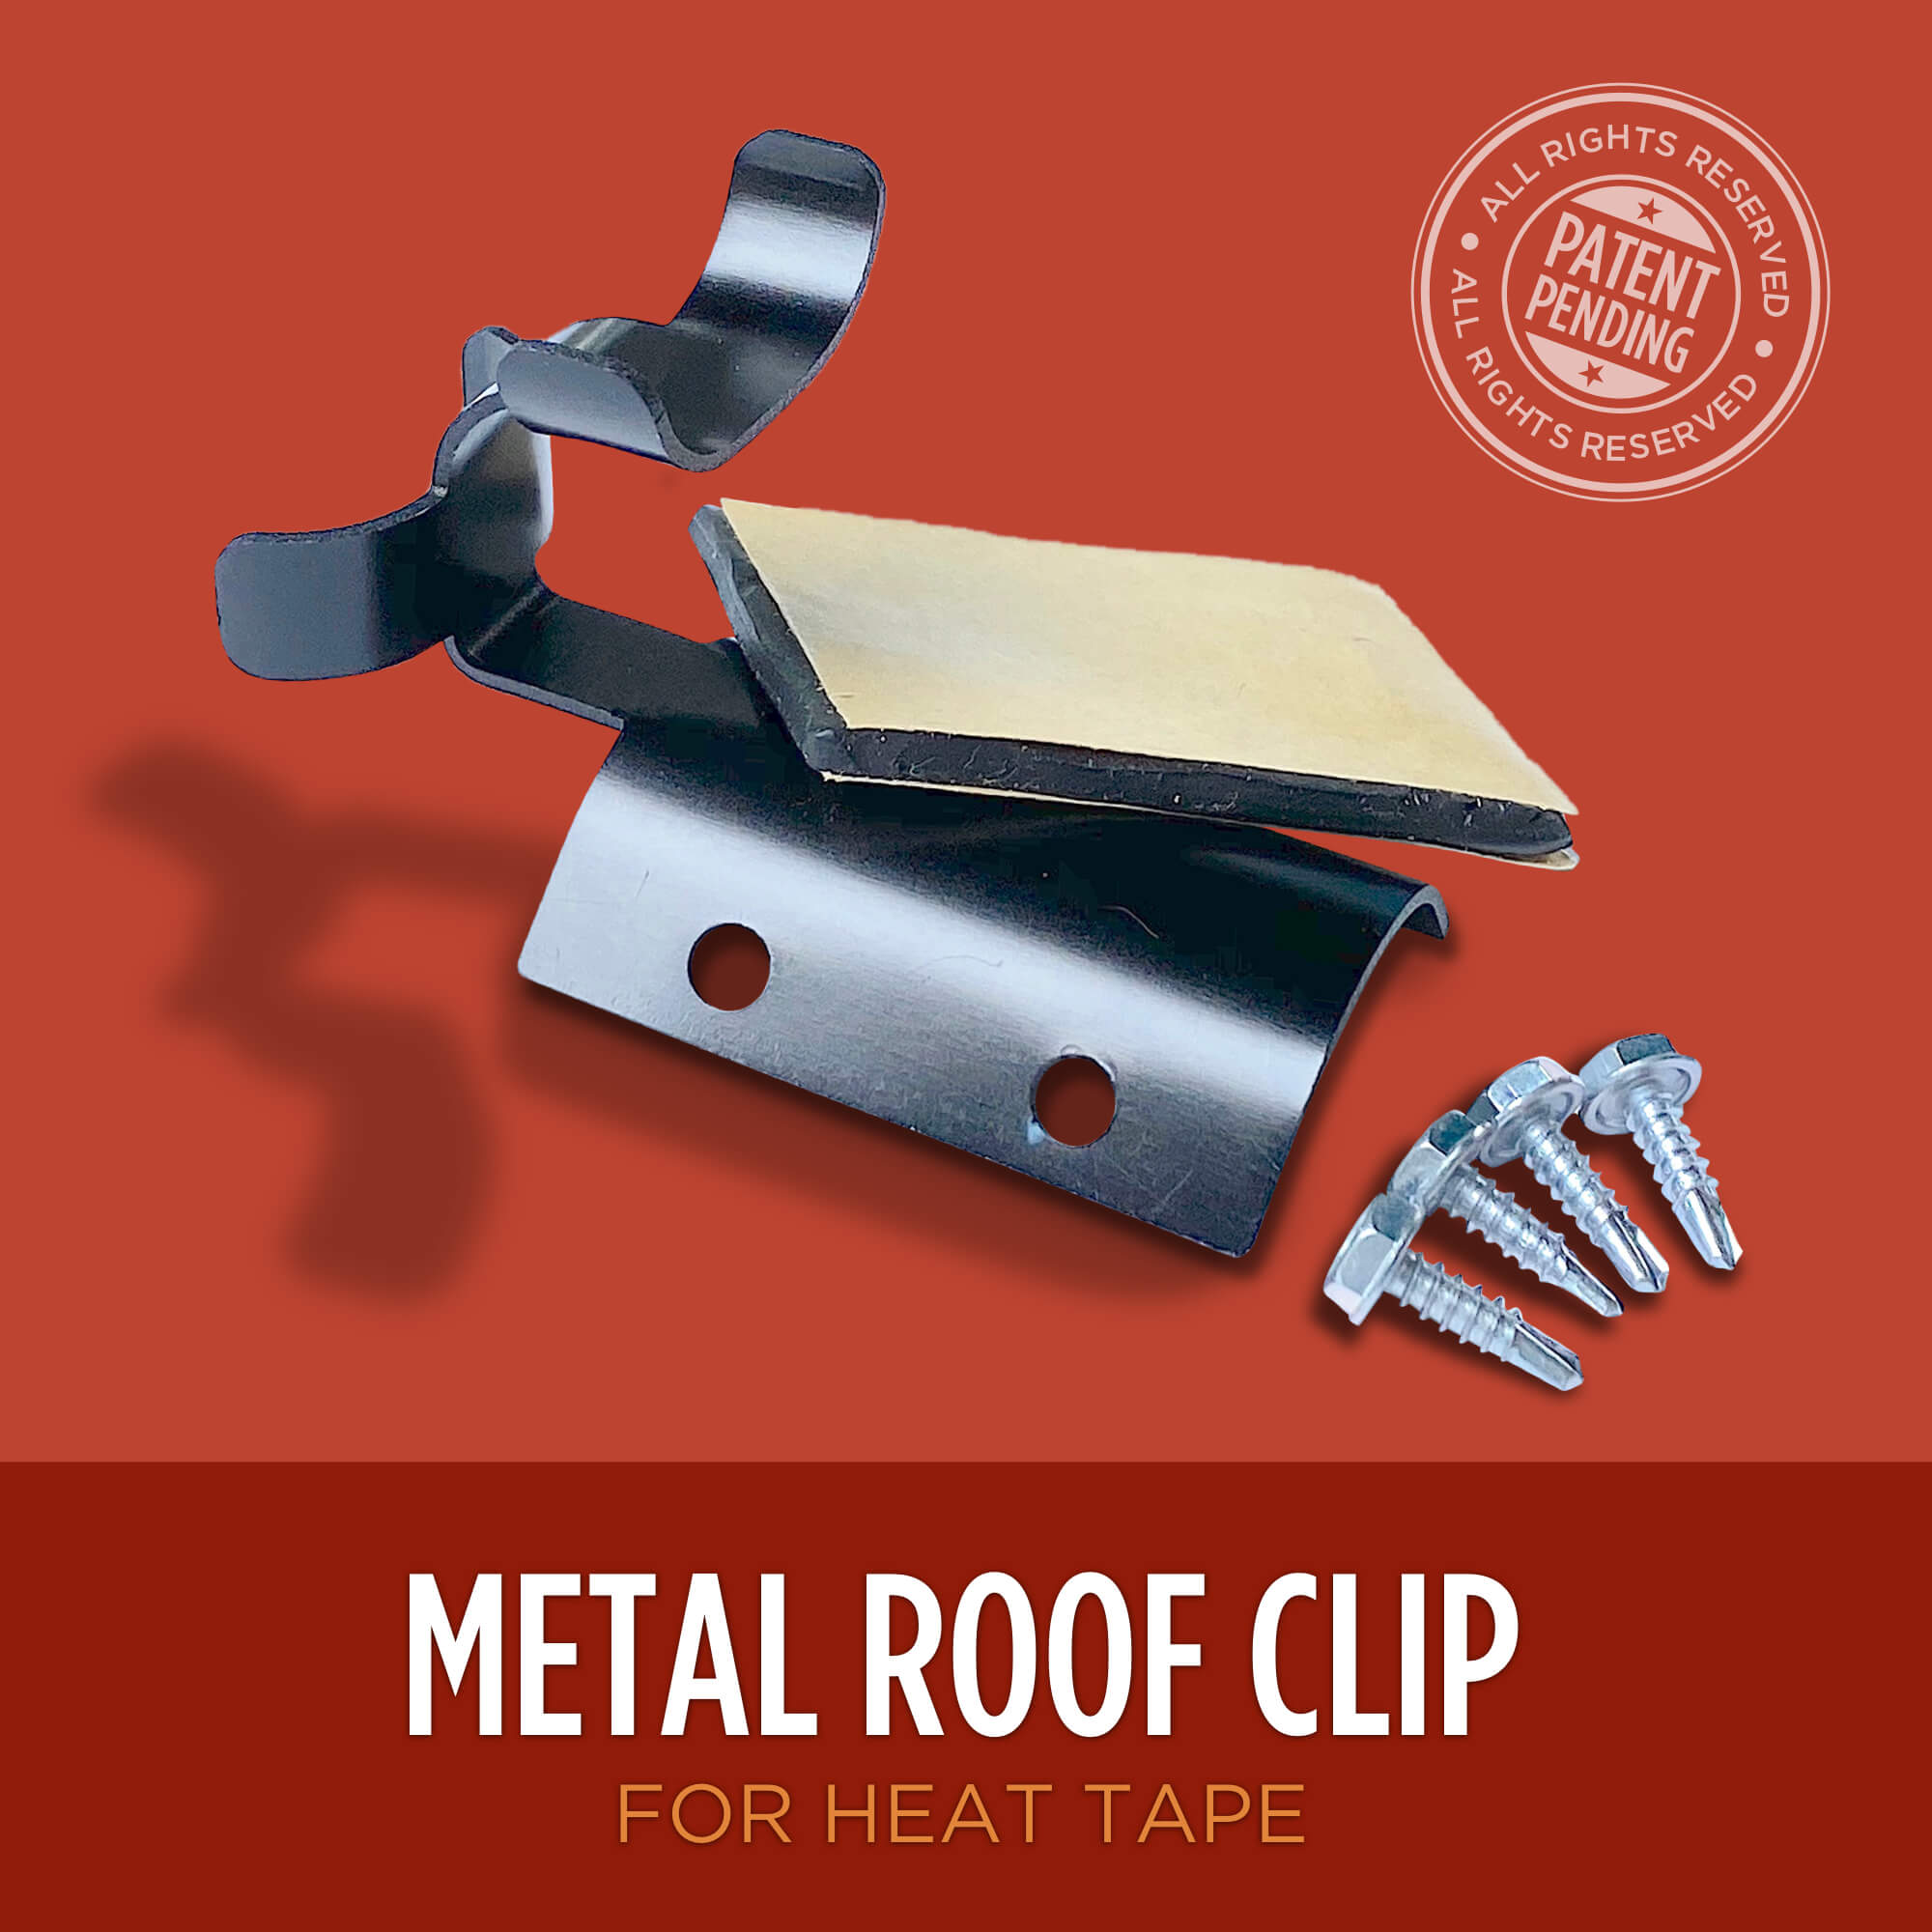 Roof Clips | Clip Hooks for Installing Heat Tape, Electric Cable & Roof  Heat Cable | Prevents Roof Damage | Simple Nail-Free Outdoor Cable Clips 